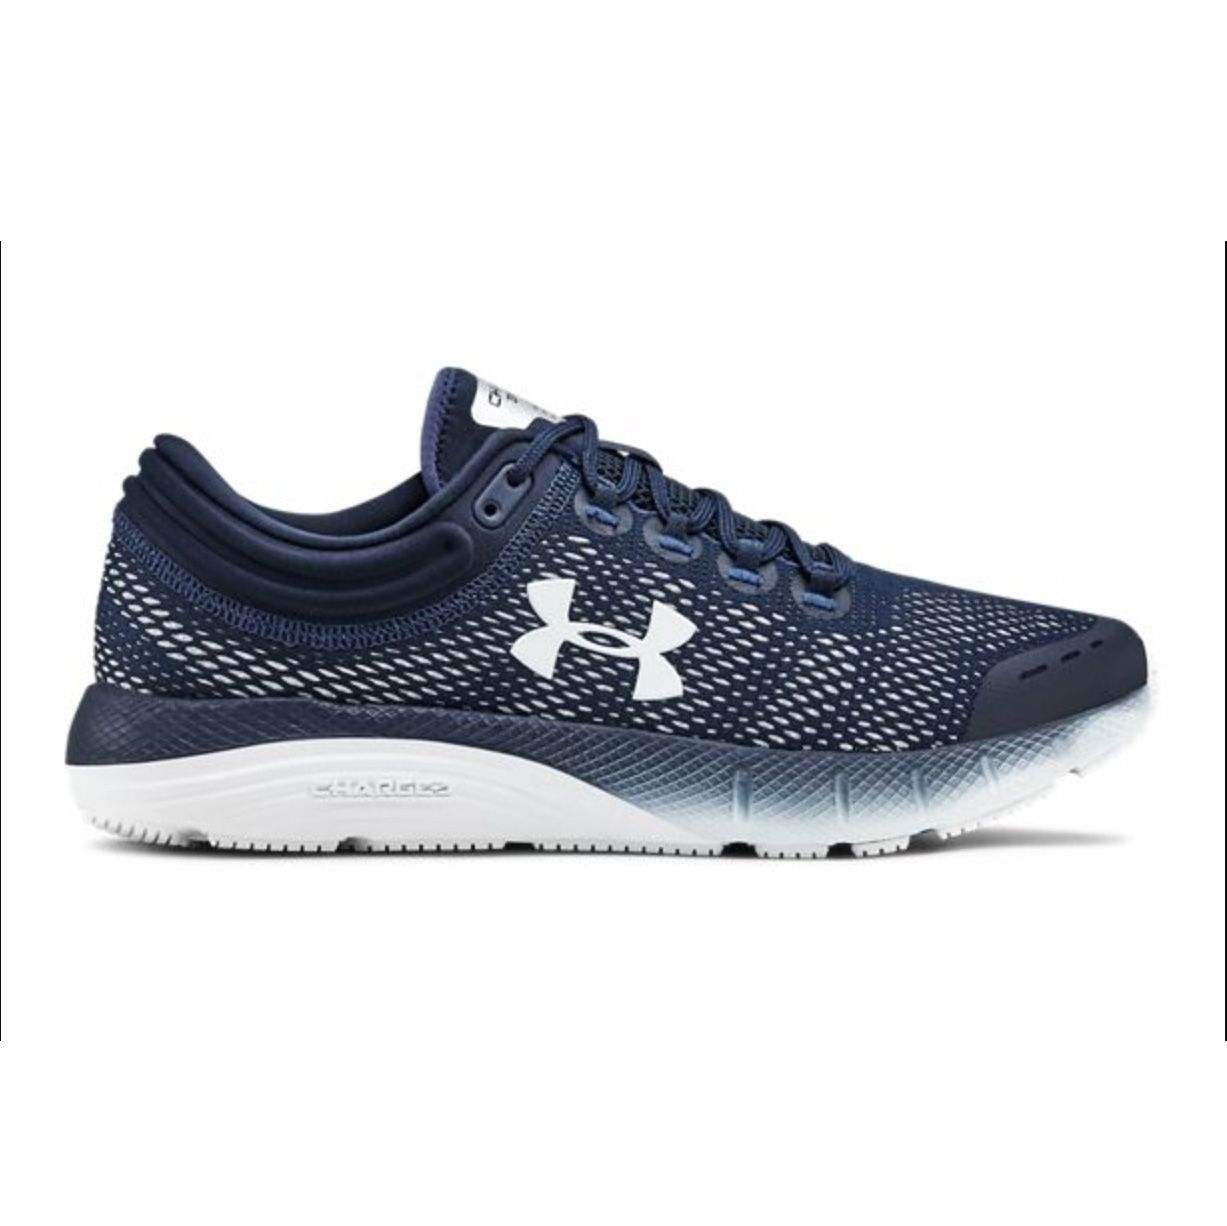 the best under armour running shoes